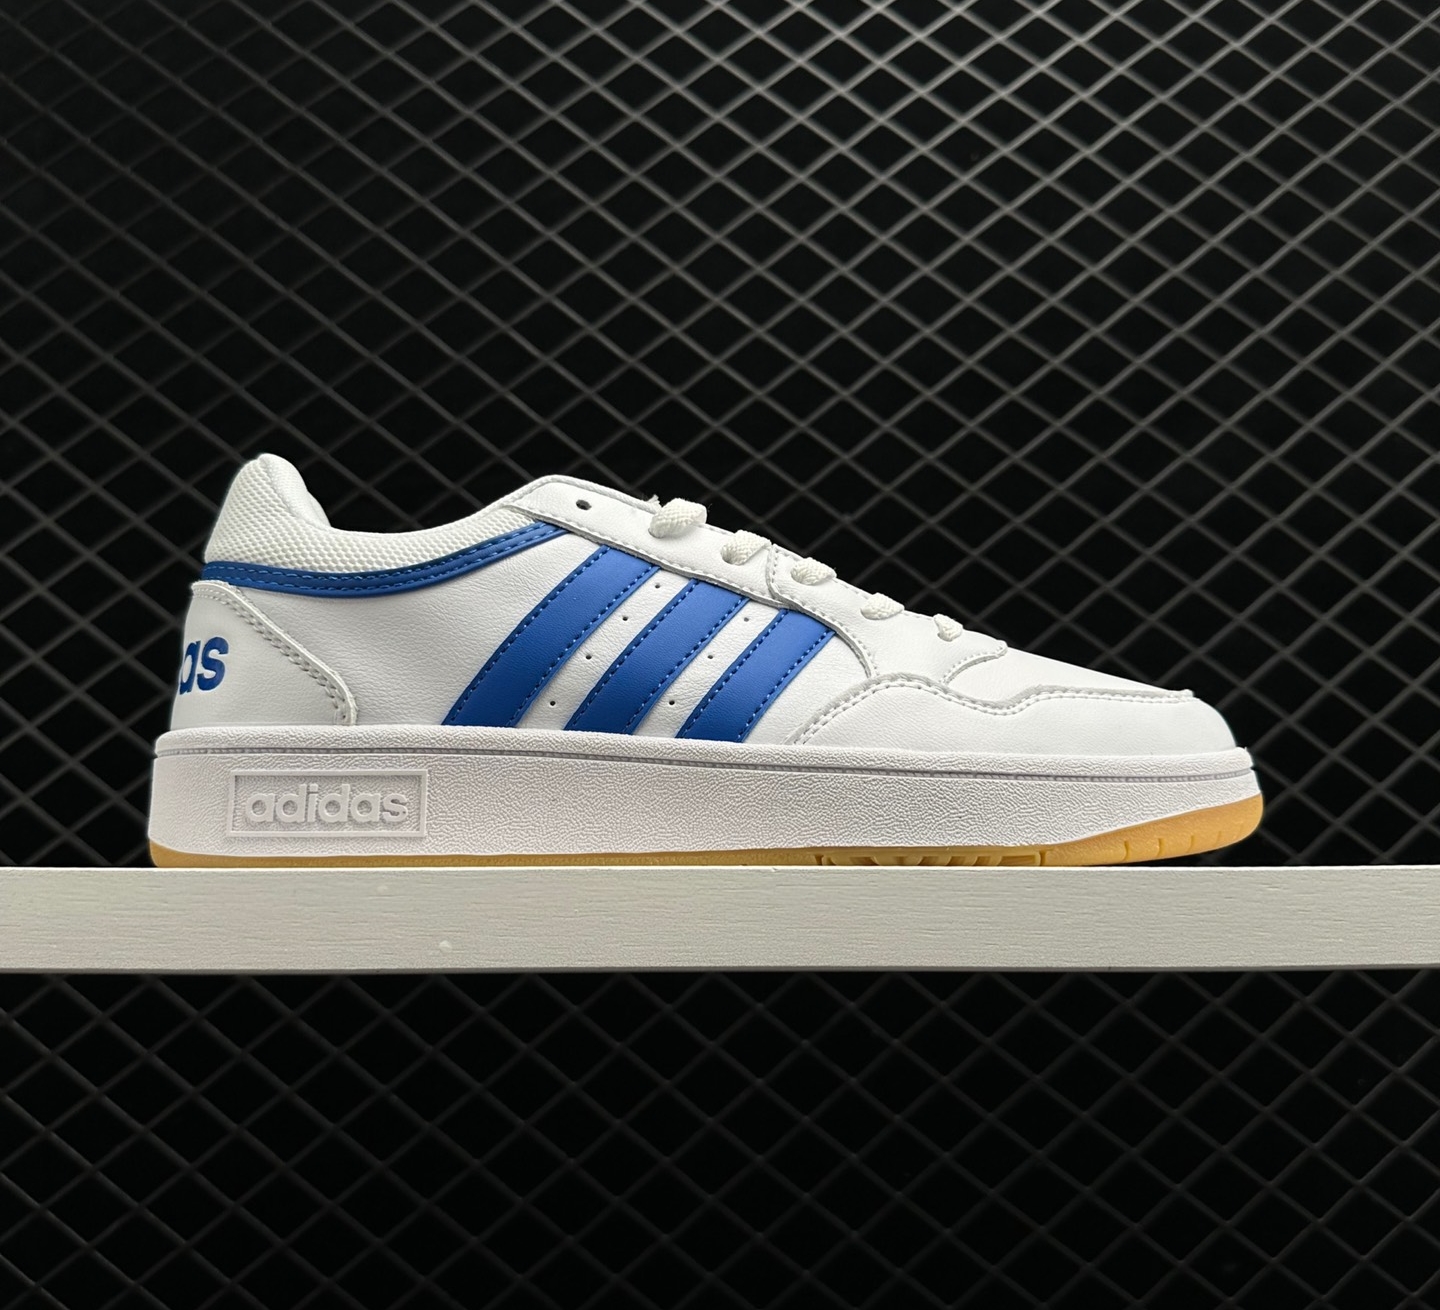 Adidas Hoops 3.0 Low Classic Vintage Shoes 'White Royal Blue' GY5435 - Stylish Retro Sneakers